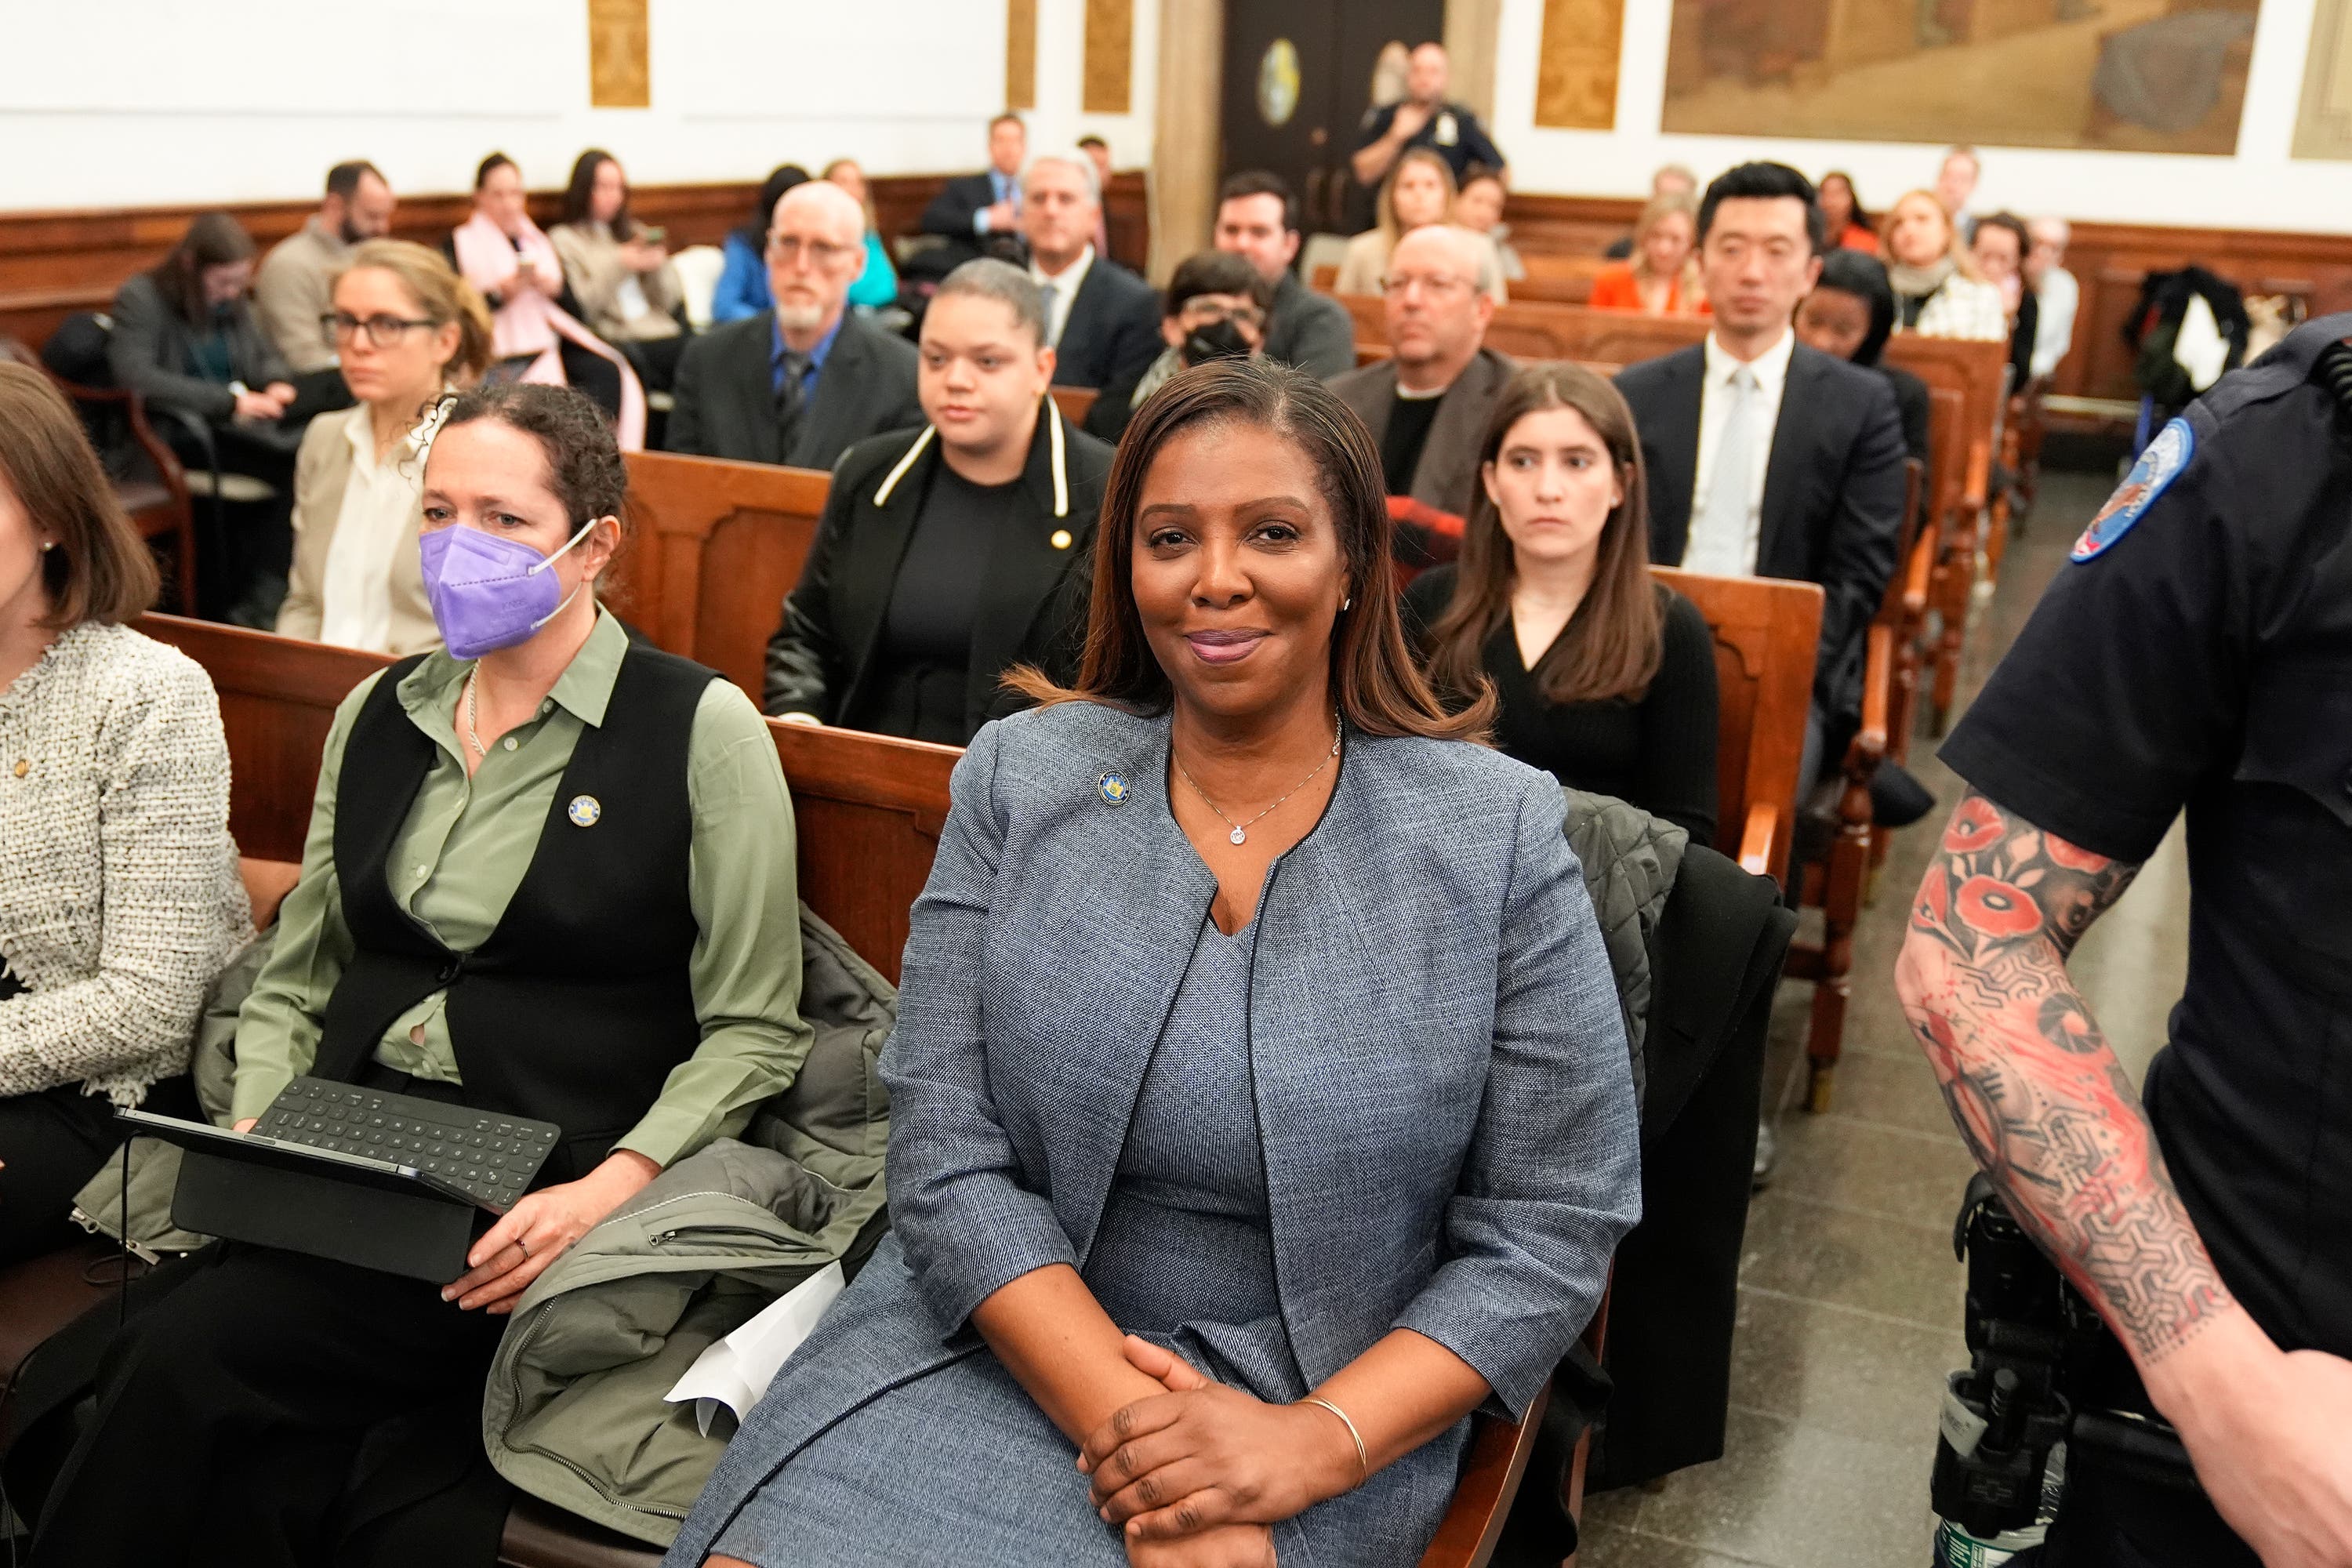 New York attorney general Letitia James awaits the start of closing arguments in the civil business fraud trial against the Trump Organisation at New York Supreme Court (Seth Wenig, Pool/AP)